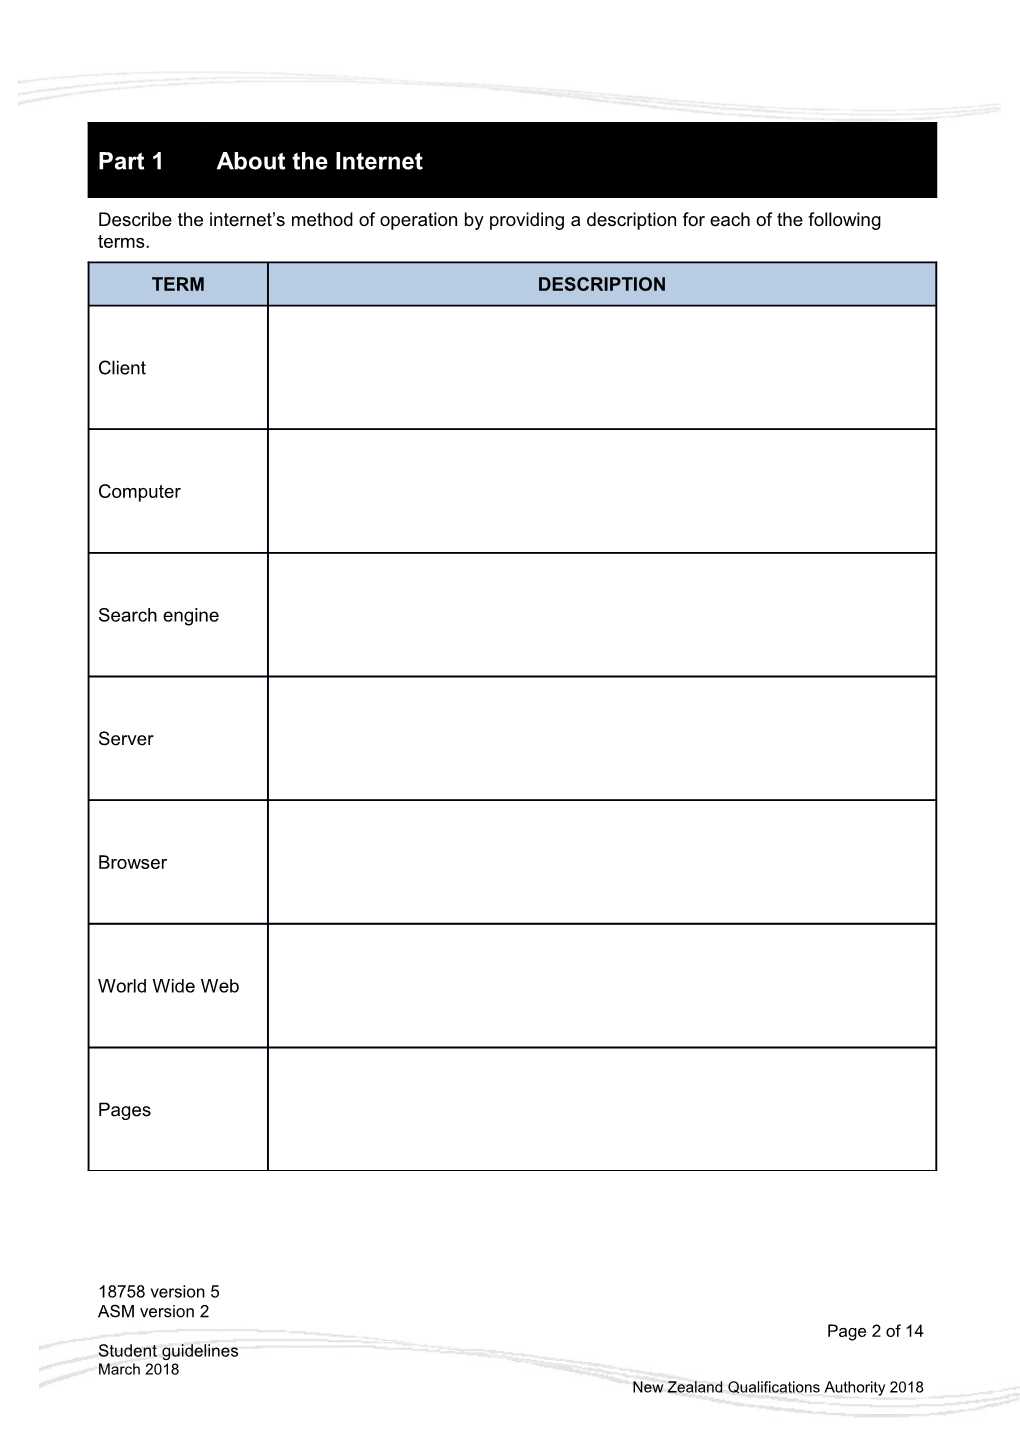 This Assessment Activity Requires You to Show That You Can